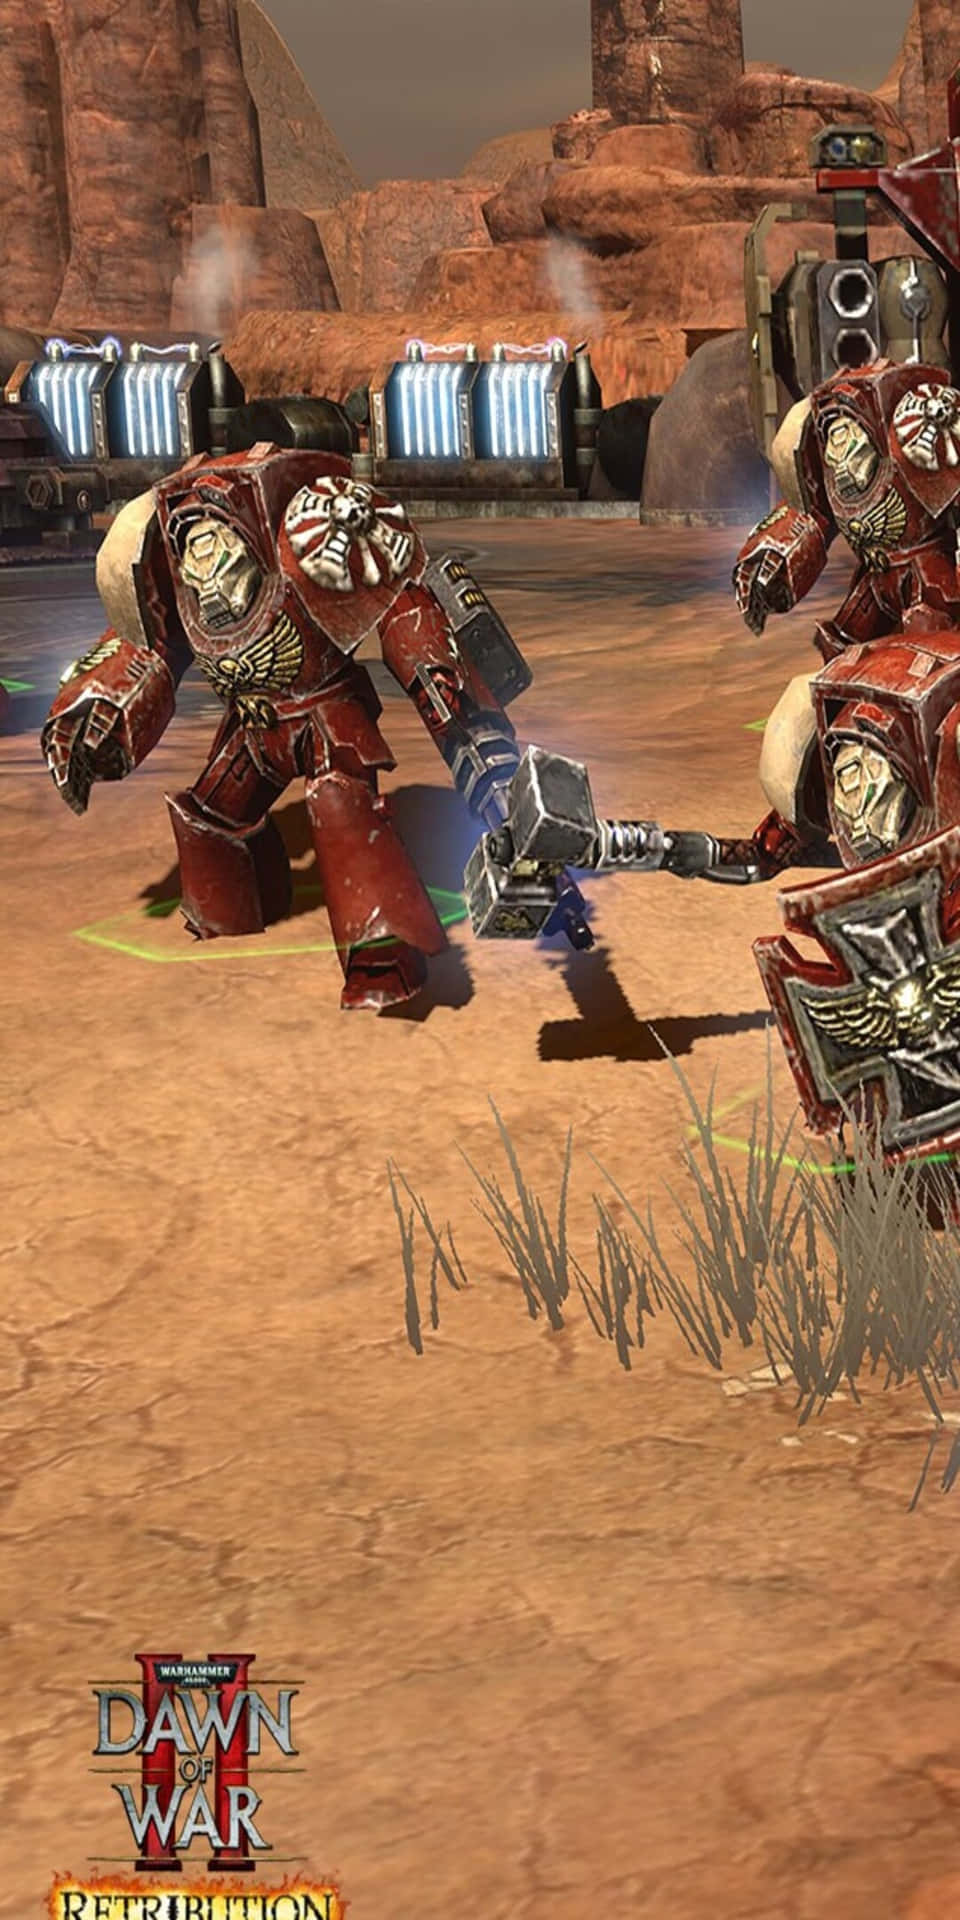 Experience Epic Warfare On Your Pixel 3 With Dawn Of War III